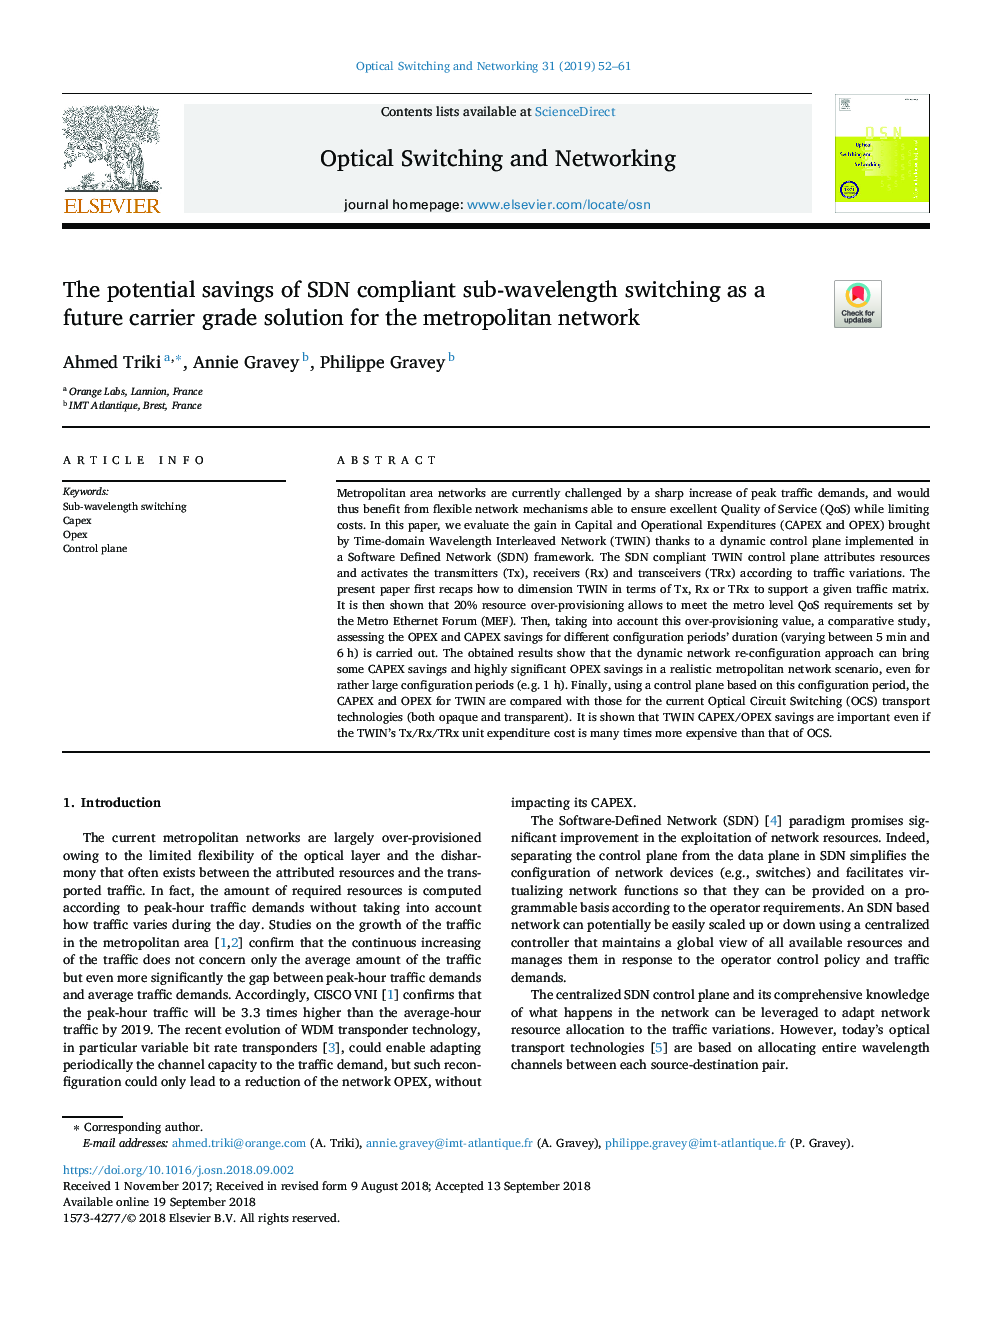 The potential savings of SDN compliant sub-wavelength switching as a future carrier grade solution for the metropolitan network